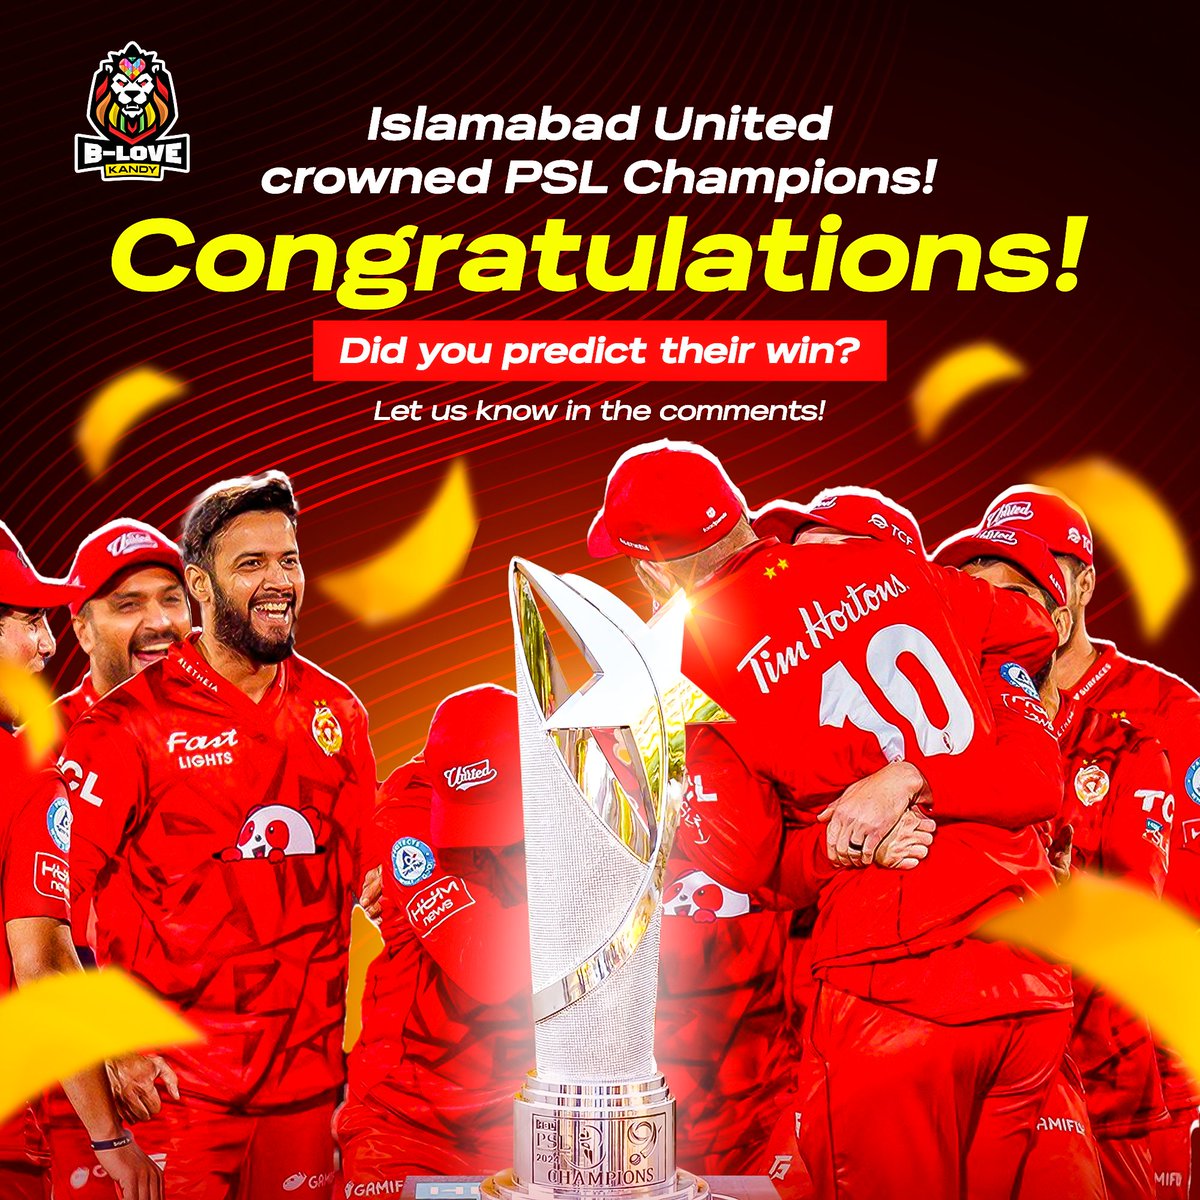 🏆🎉 Congratulations to Islamabad United on clinching the PSL 2024 Championship! 🏏 🥇 A phenomenal display of skill and determination. Here's to celebrating the spirit of cricket and looking forward to our own triumphs in the next season! 💪 #IslamabadUnited #BLoveKandy #PSL